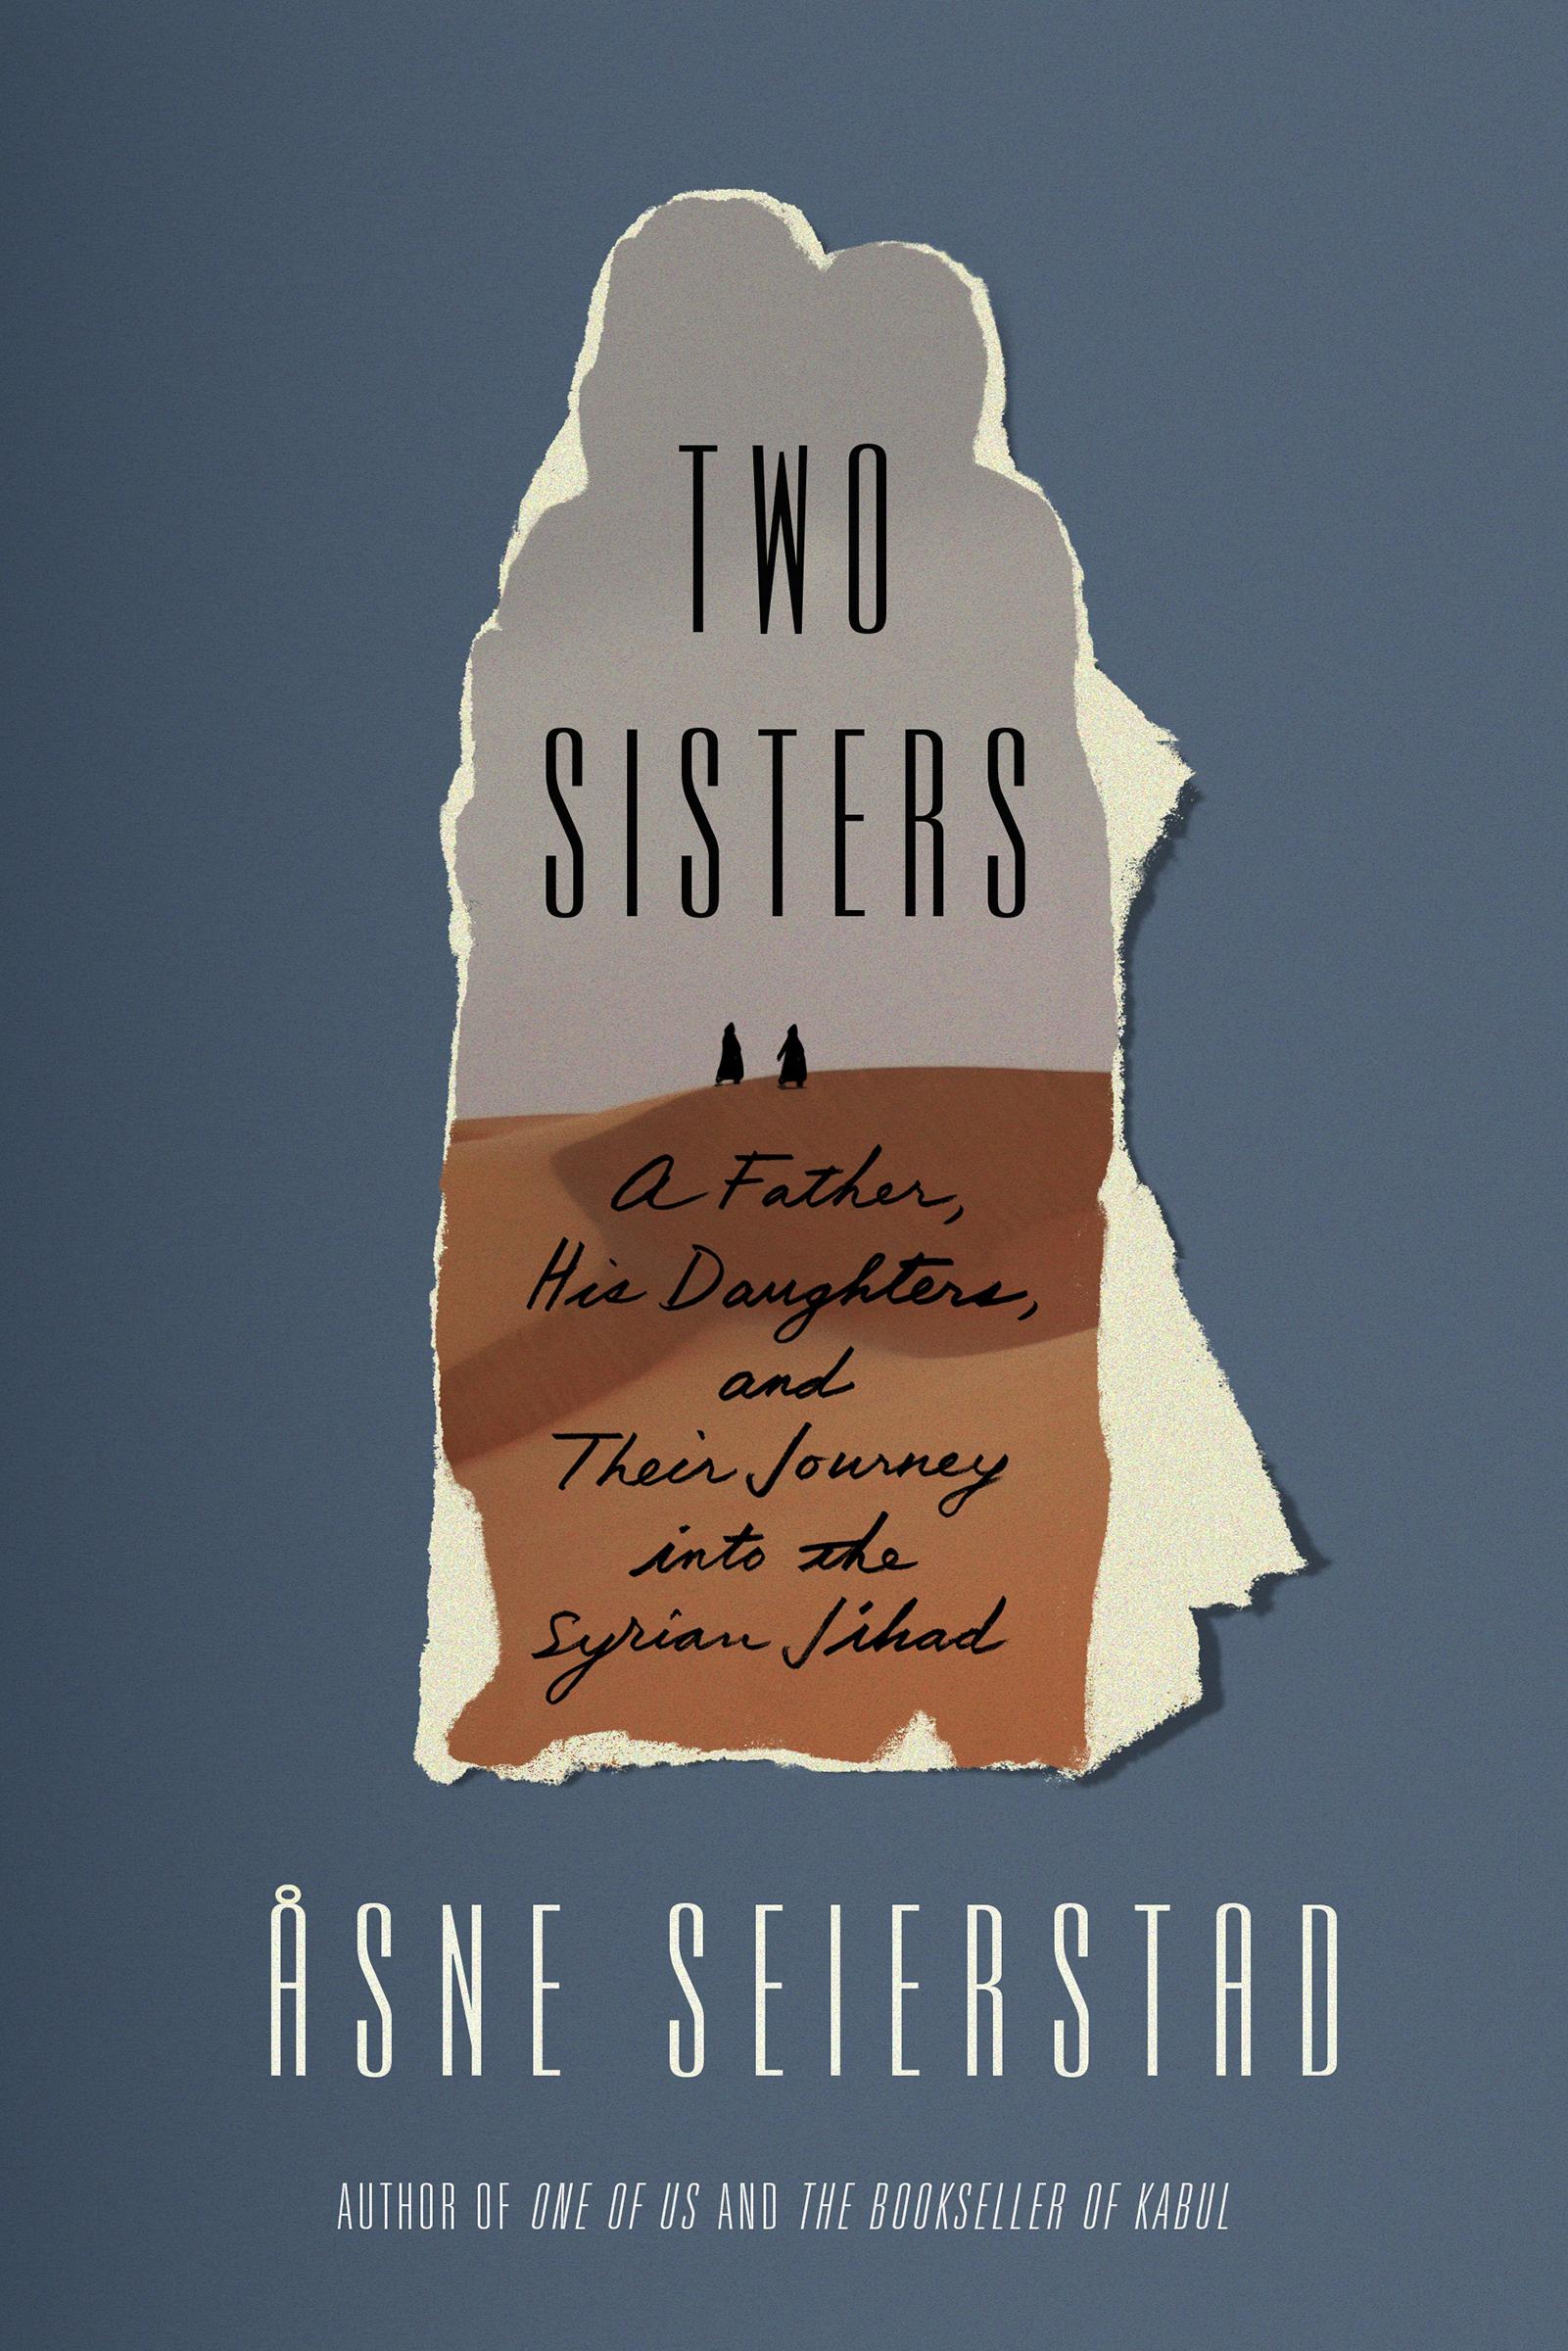 Two Sisters.  A Father, His Daughters, and Their Journey into the Syrian Jihad